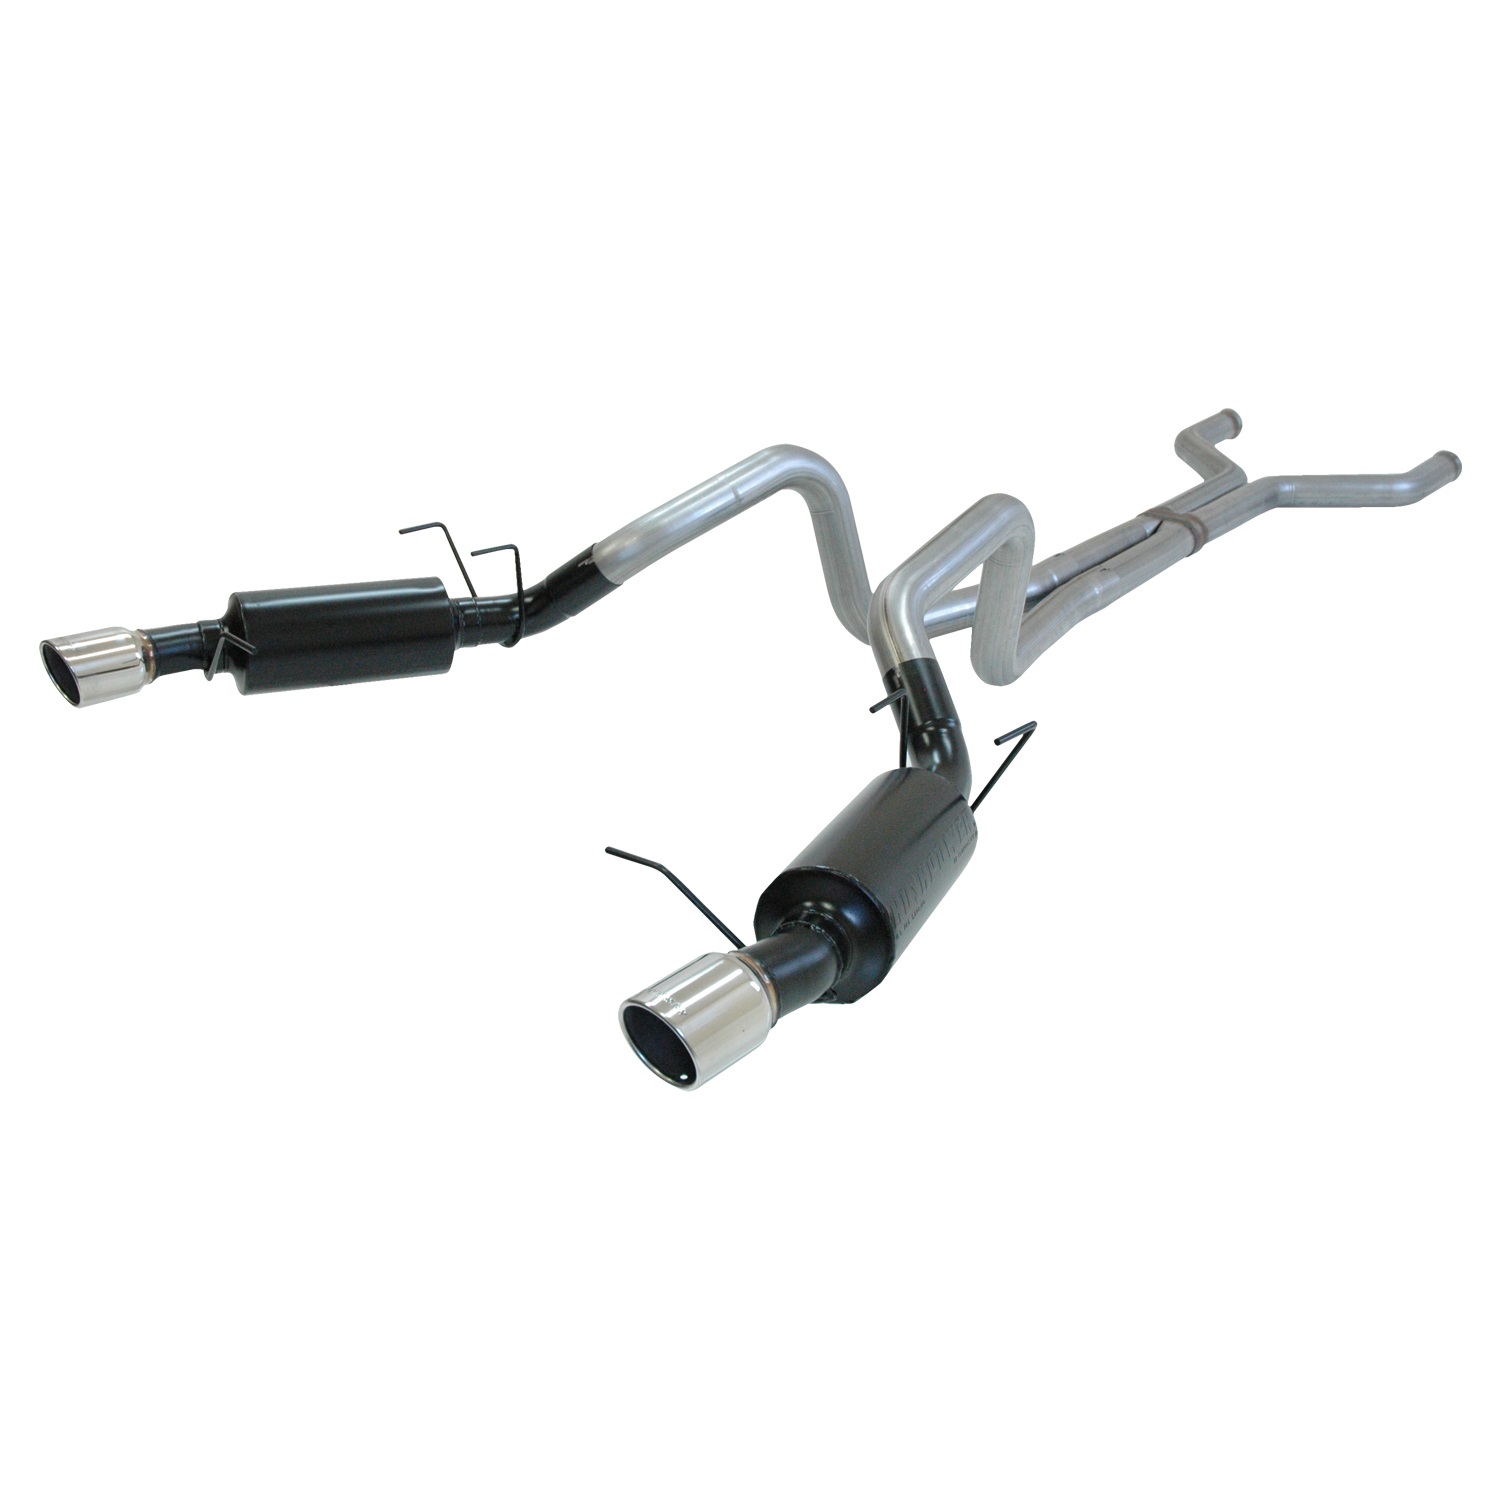 Flowmaster Flowmaster 819112 Pro Series Cat Back Exhaust System 11-12 Mustang